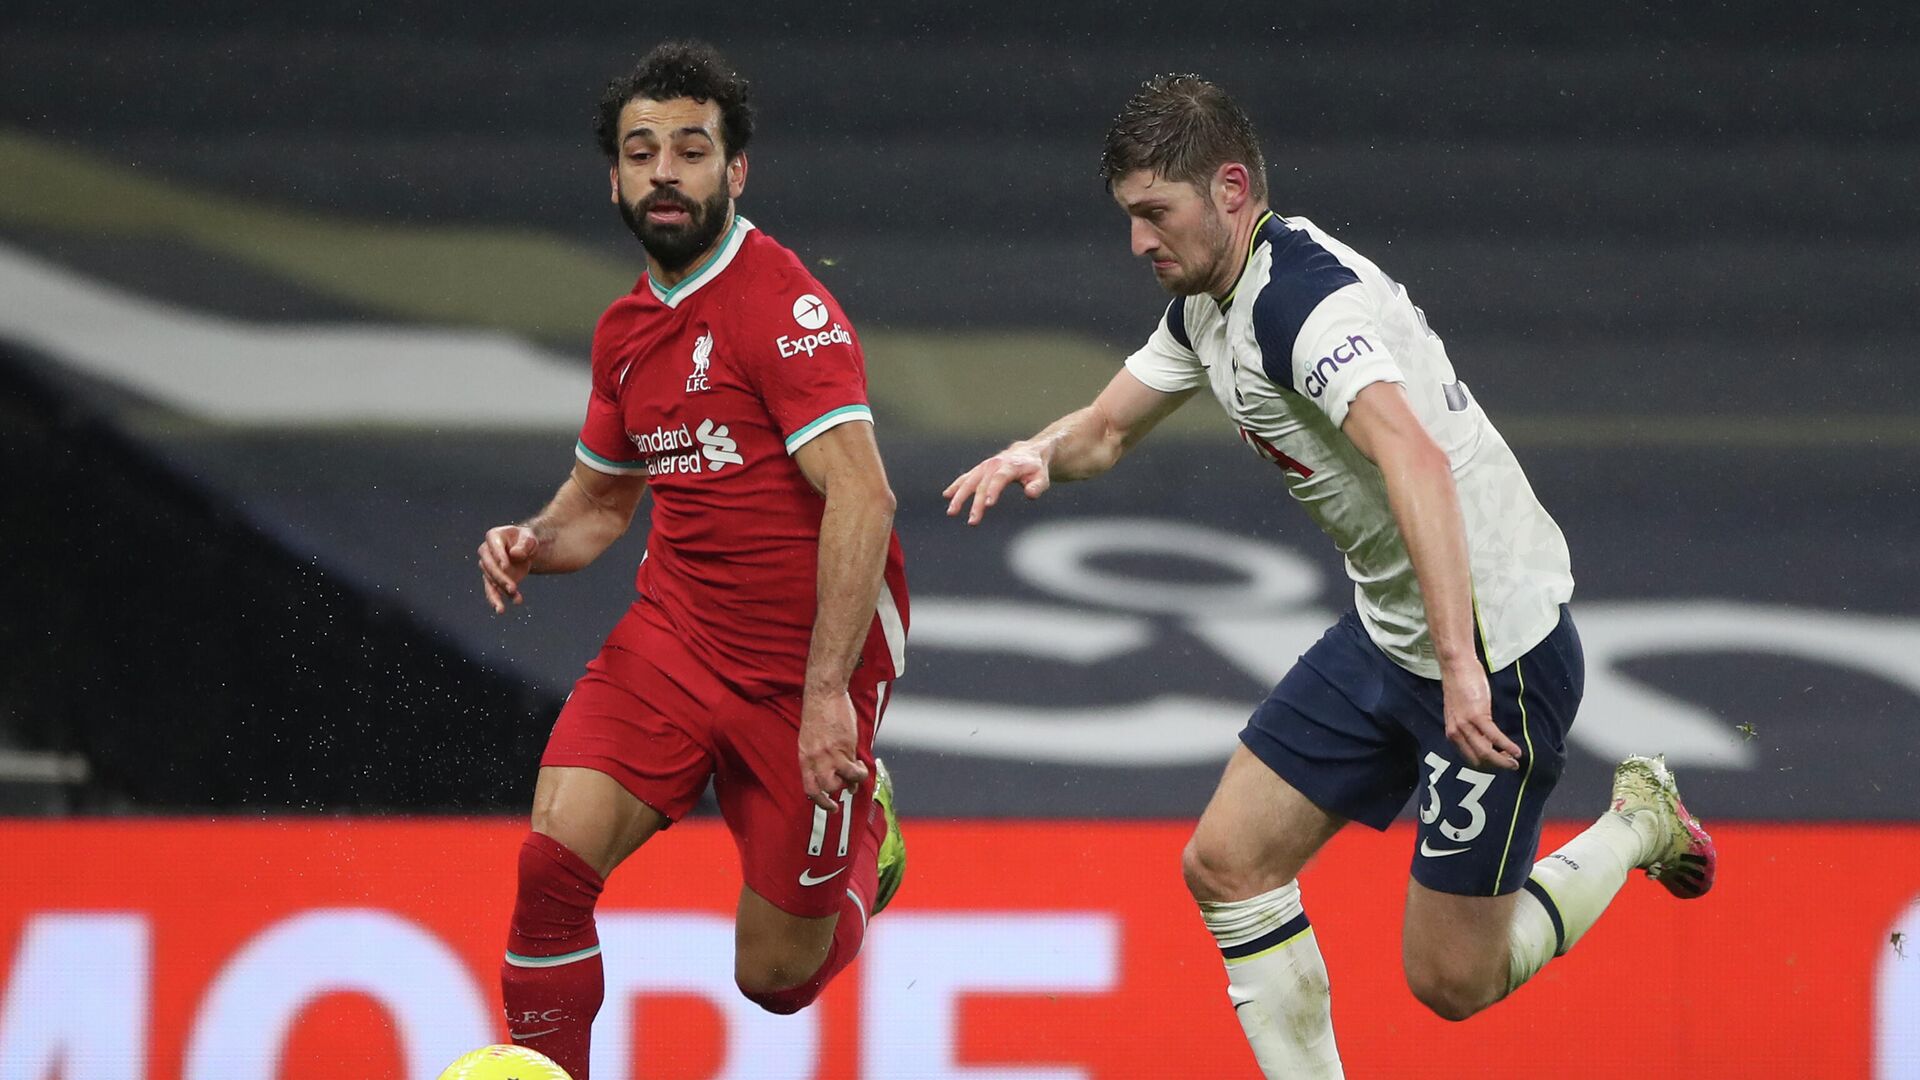 Liverpool's Egyptian midfielder Mohamed Salah (L) takes on Tottenham Hotspur's Welsh defender Ben Davies (R) during the English Premier League football match between Tottenham Hotspur and Liverpool at Tottenham Hotspur Stadium in London, on January 28, 2021. (Photo by Nick Potts / POOL / AFP) / RESTRICTED TO EDITORIAL USE. No use with unauthorized audio, video, data, fixture lists, club/league logos or 'live' services. Online in-match use limited to 120 images. An additional 40 images may be used in extra time. No video emulation. Social media in-match use limited to 120 images. An additional 40 images may be used in extra time. No use in betting publications, games or single club/league/player publications. /  - РИА Новости, 1920, 29.01.2021